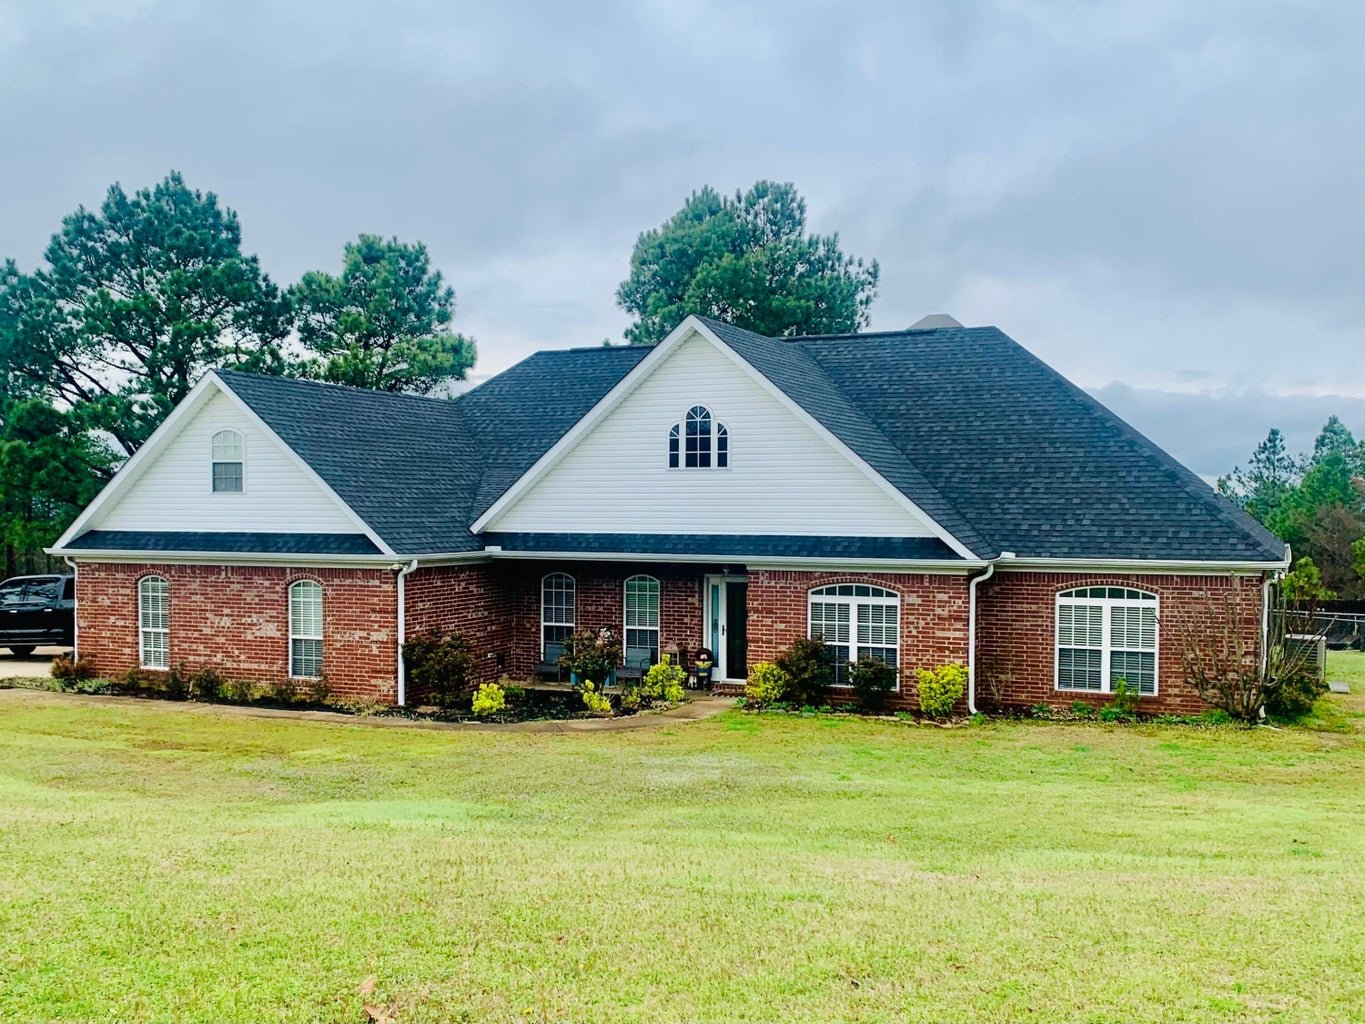 Discover this beautiful Perryville home! 😍❤️ Experience the best of country living, just 30 minutes from Little Rock or Conway.

Recent updates include a new roof, luxury vinyl flooring, light fixtures, fresh paint, cabinets, quartz countertops, and